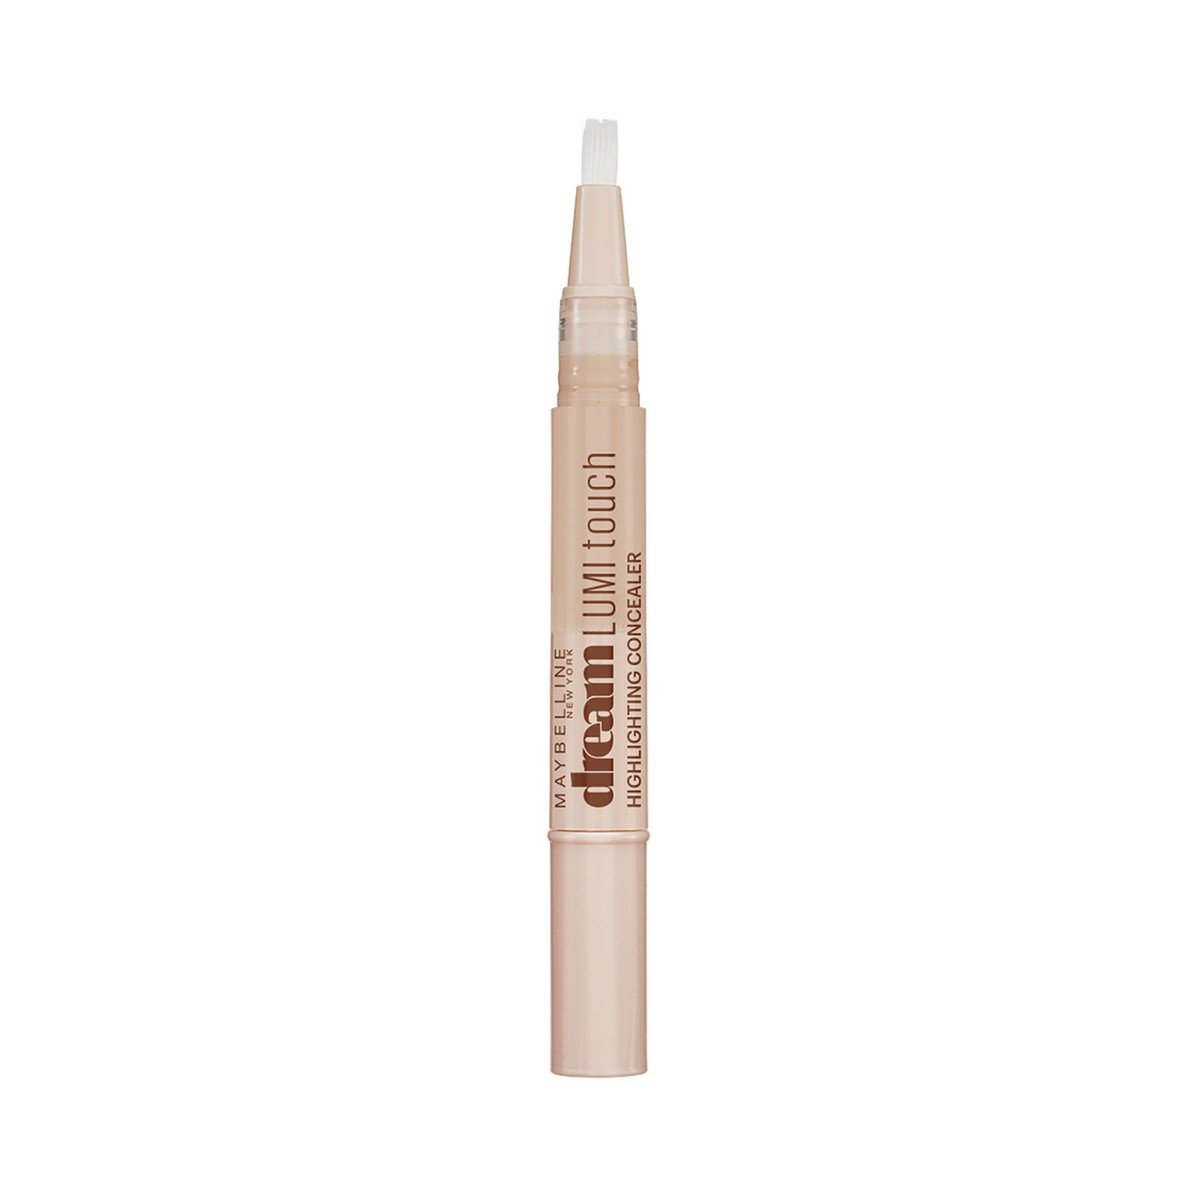 Maybelline Dream Lumi Touch Concealer Ivory 01 1pc